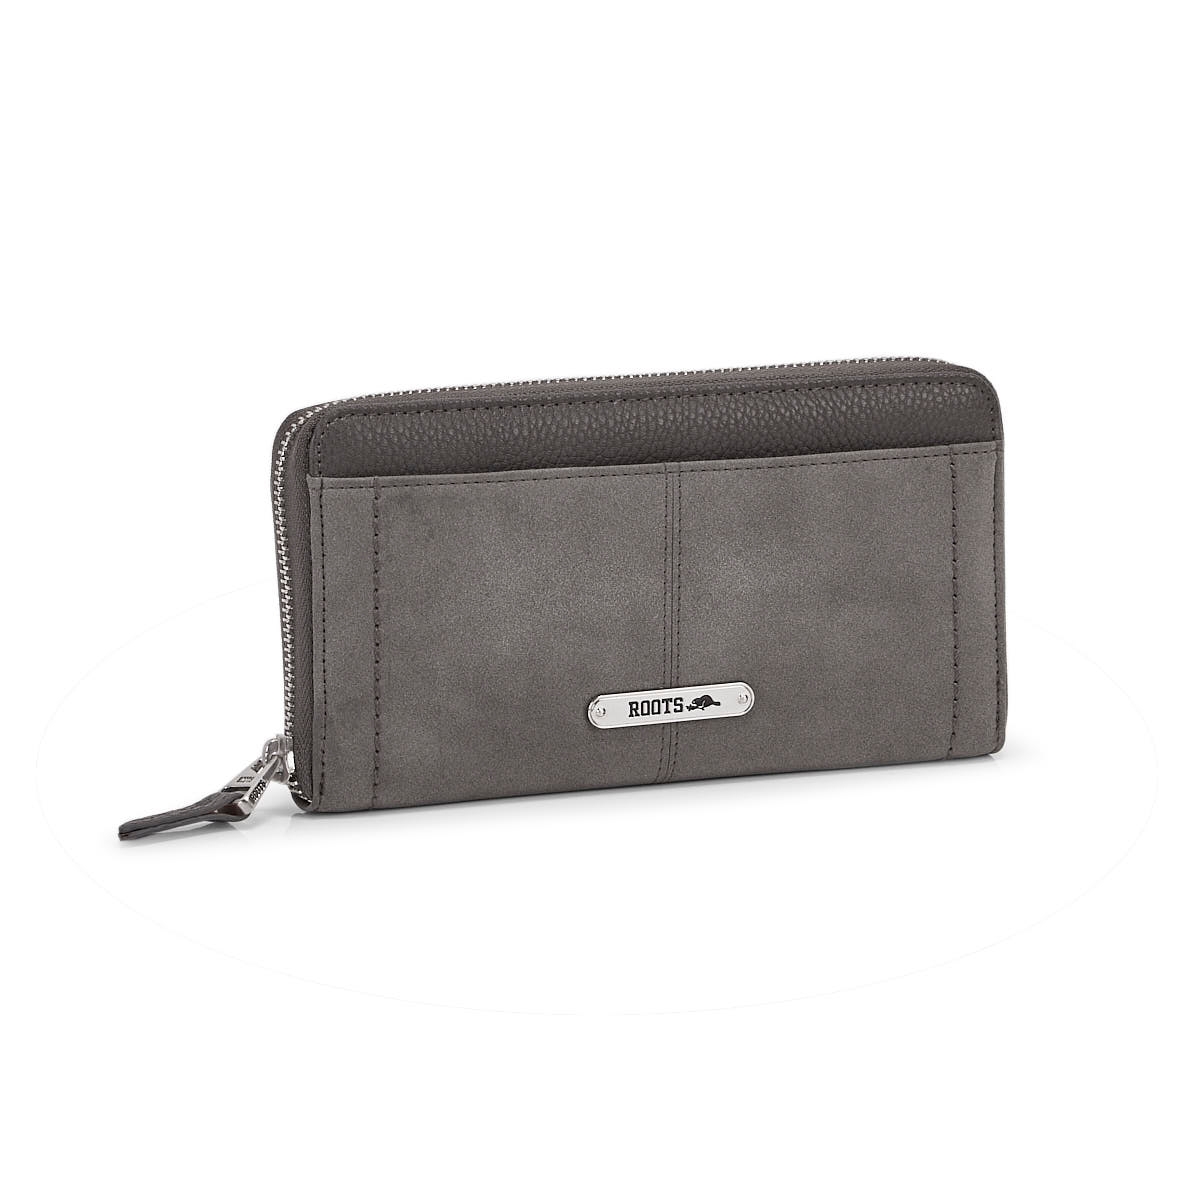 Roots Women's FAIRWEATHER charcoal wallet | SoftMoc.com